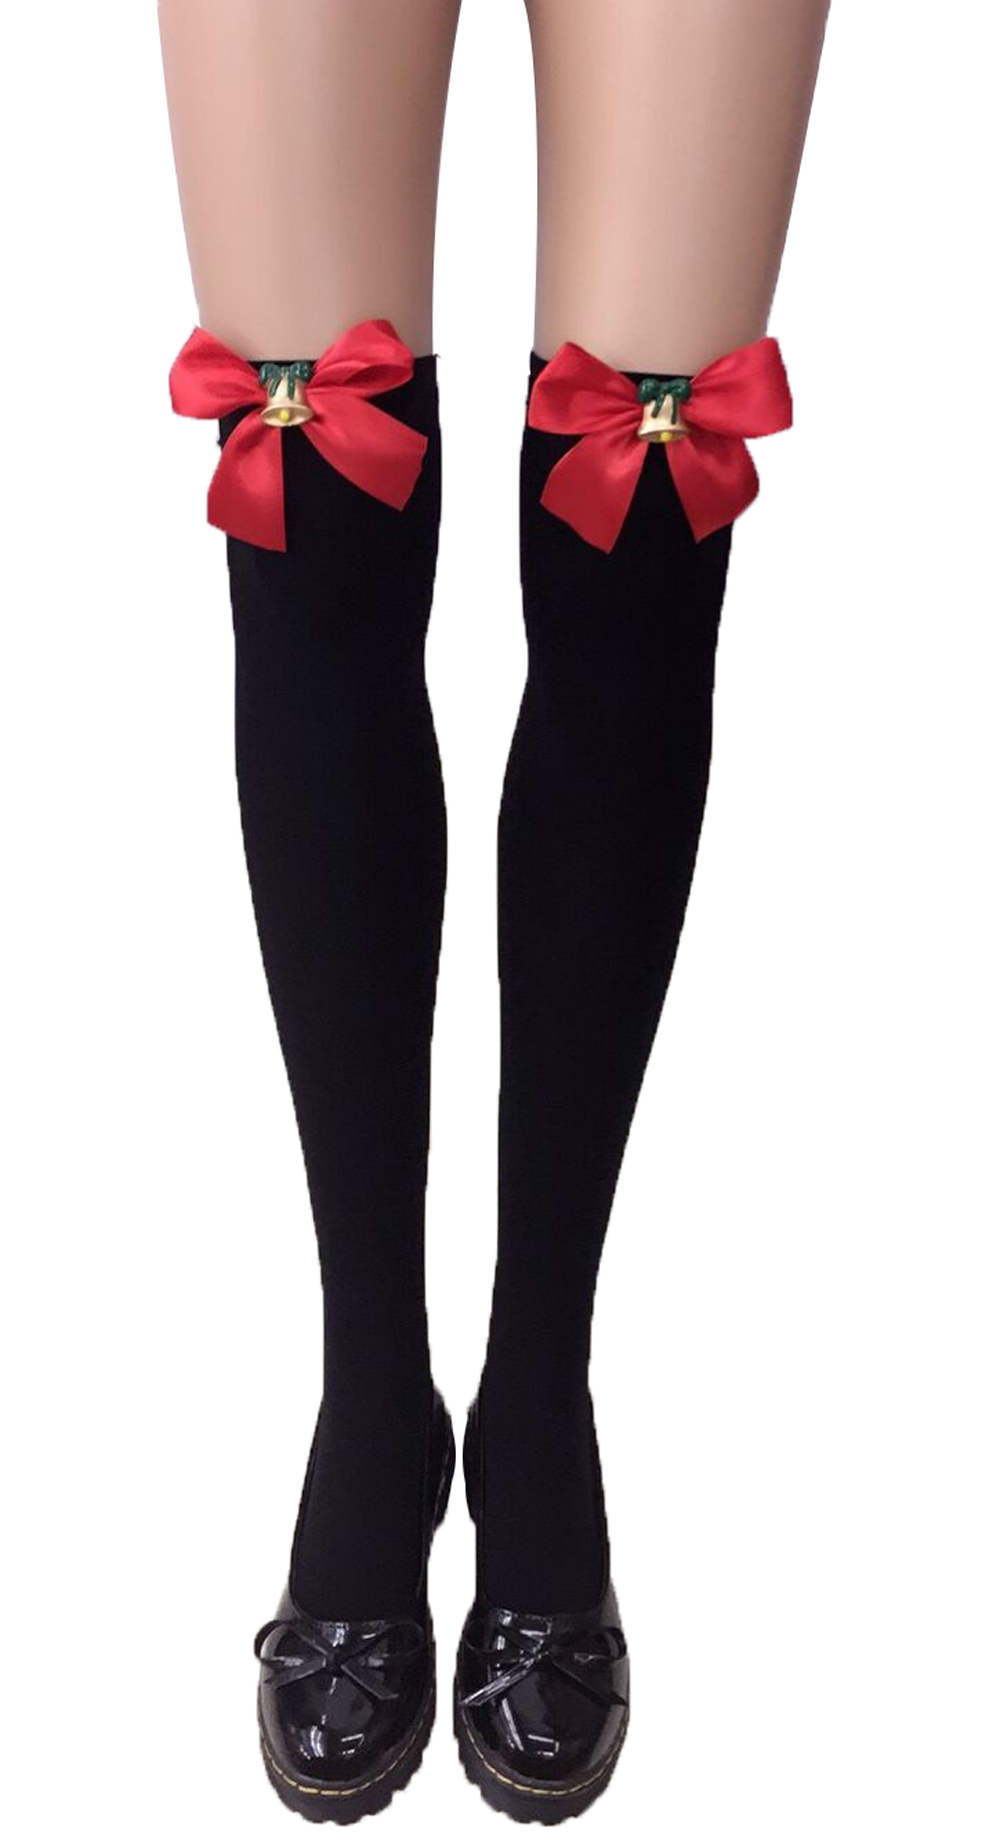 F8195-2 Thigh Stocking with Satin Bows Opaque Over The Knee Halloween Socks